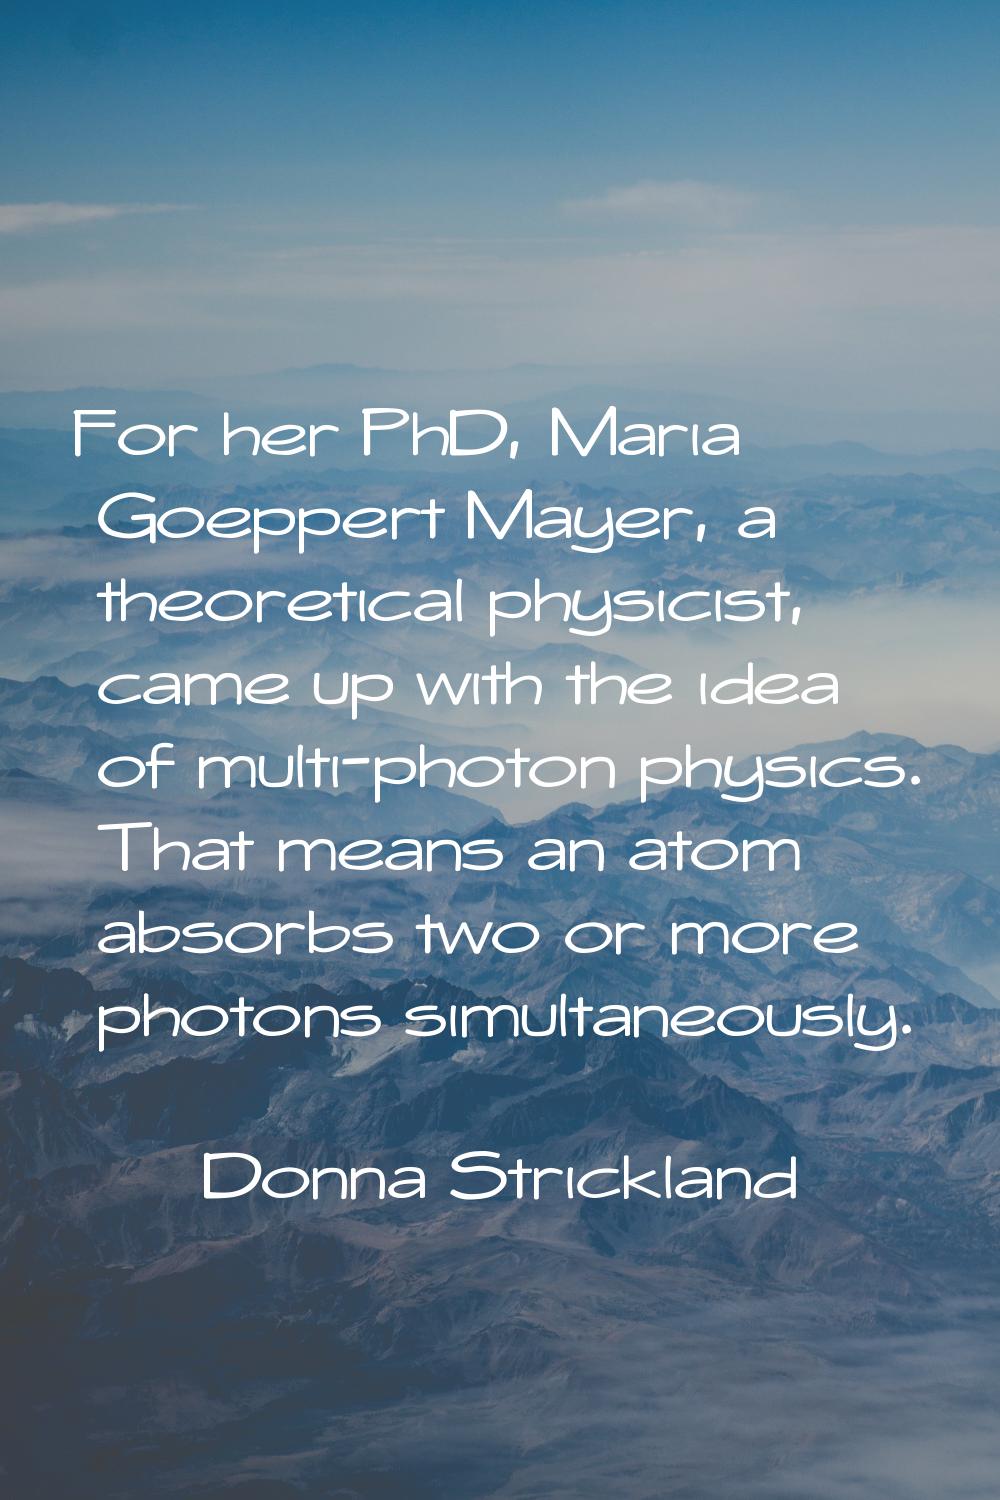 For her PhD, Maria Goeppert Mayer, a theoretical physicist, came up with the idea of multi-photon p